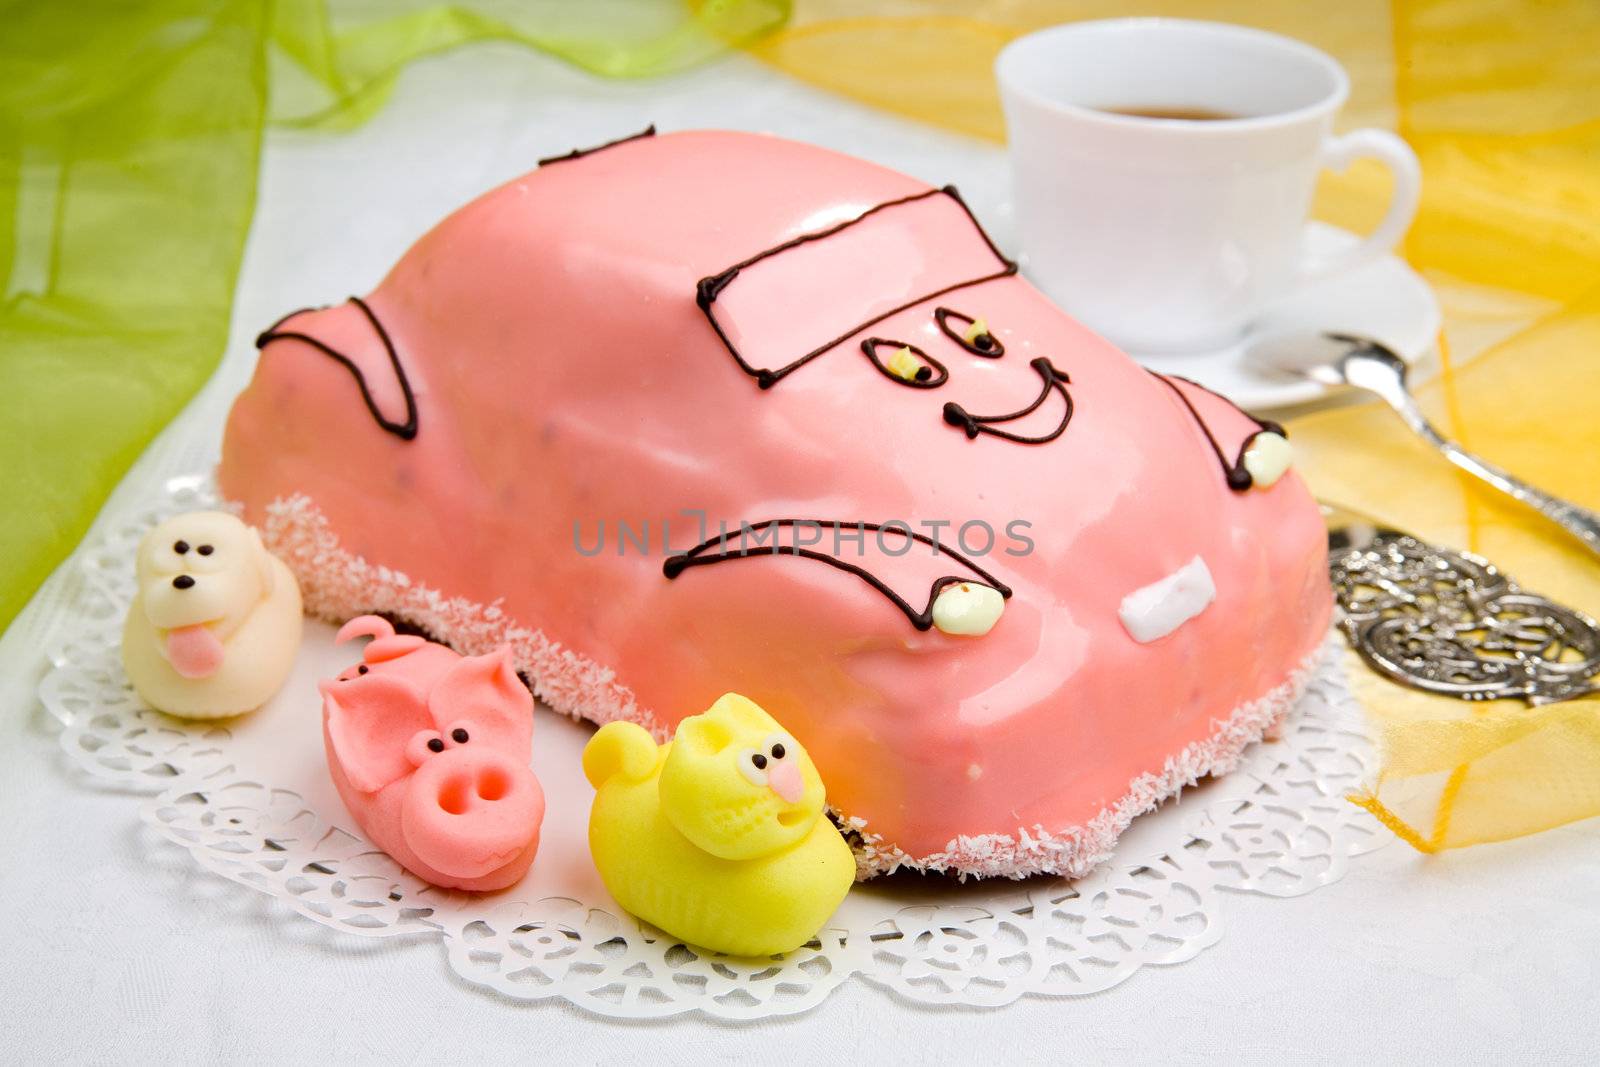 sweet and delicious cake looking like retro car and three passengers: pig, cat and dog